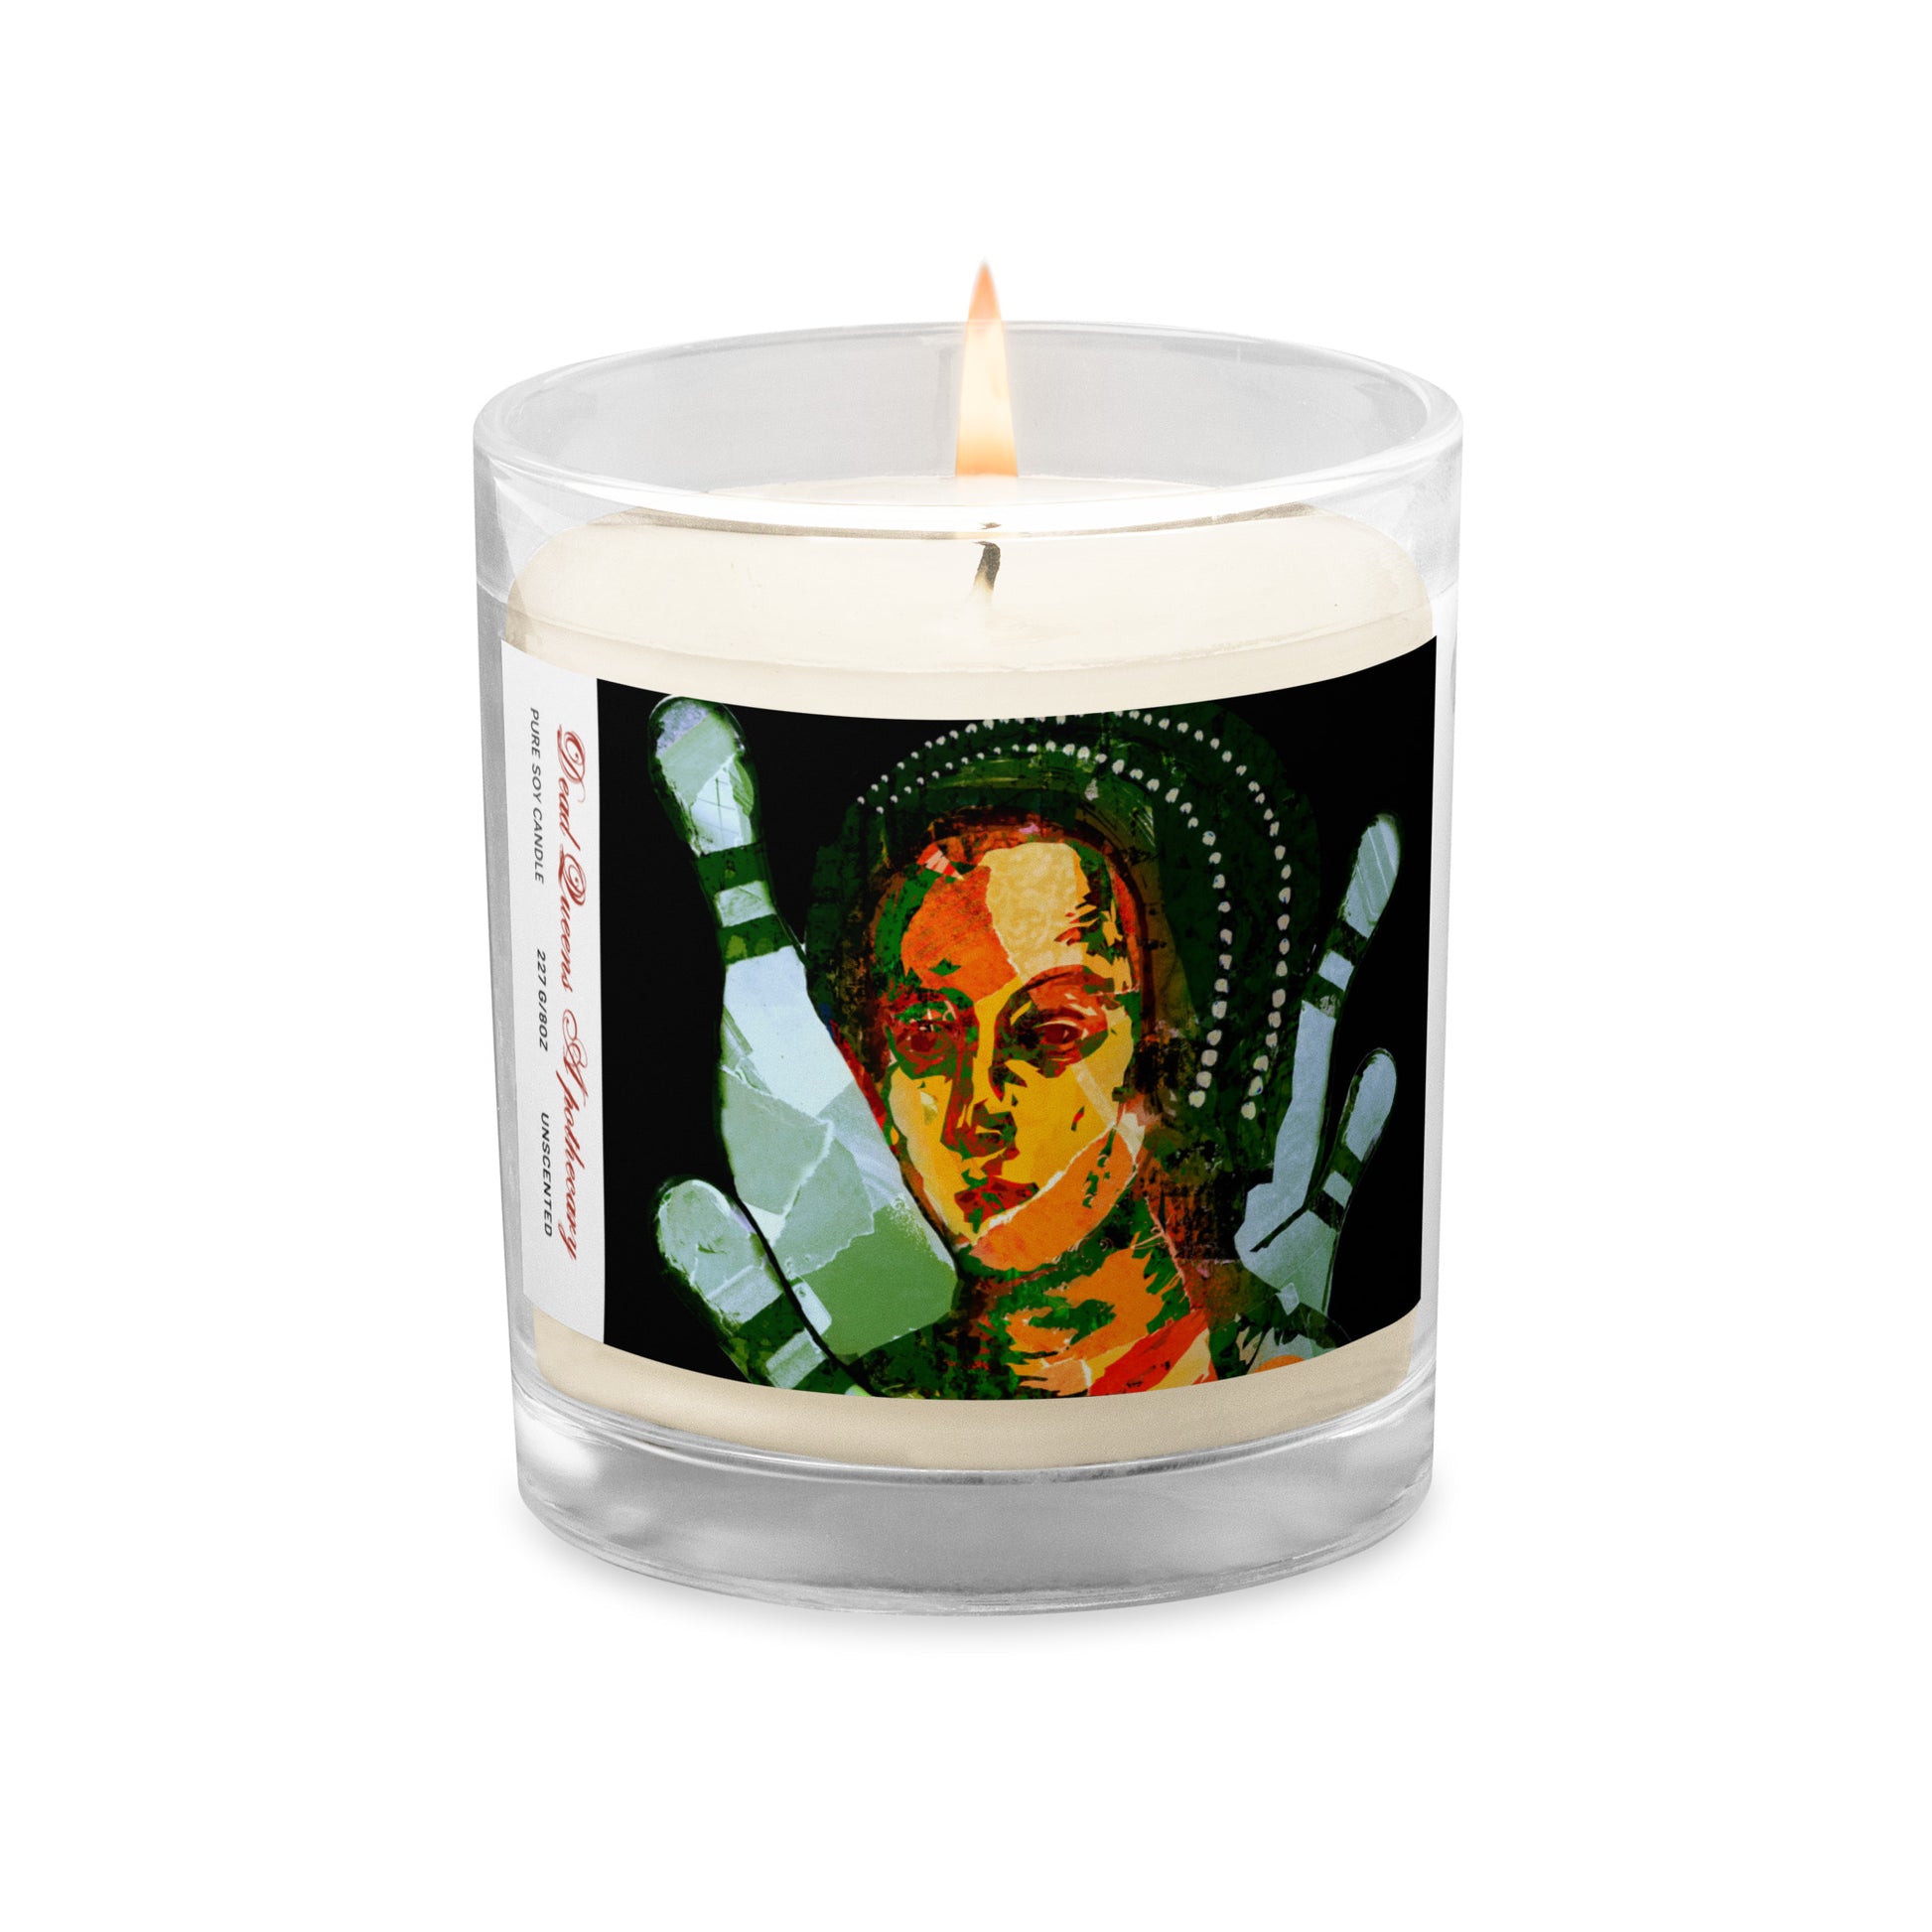 Anne Boleyn English Rose Candle - Dead Queens Apothecary